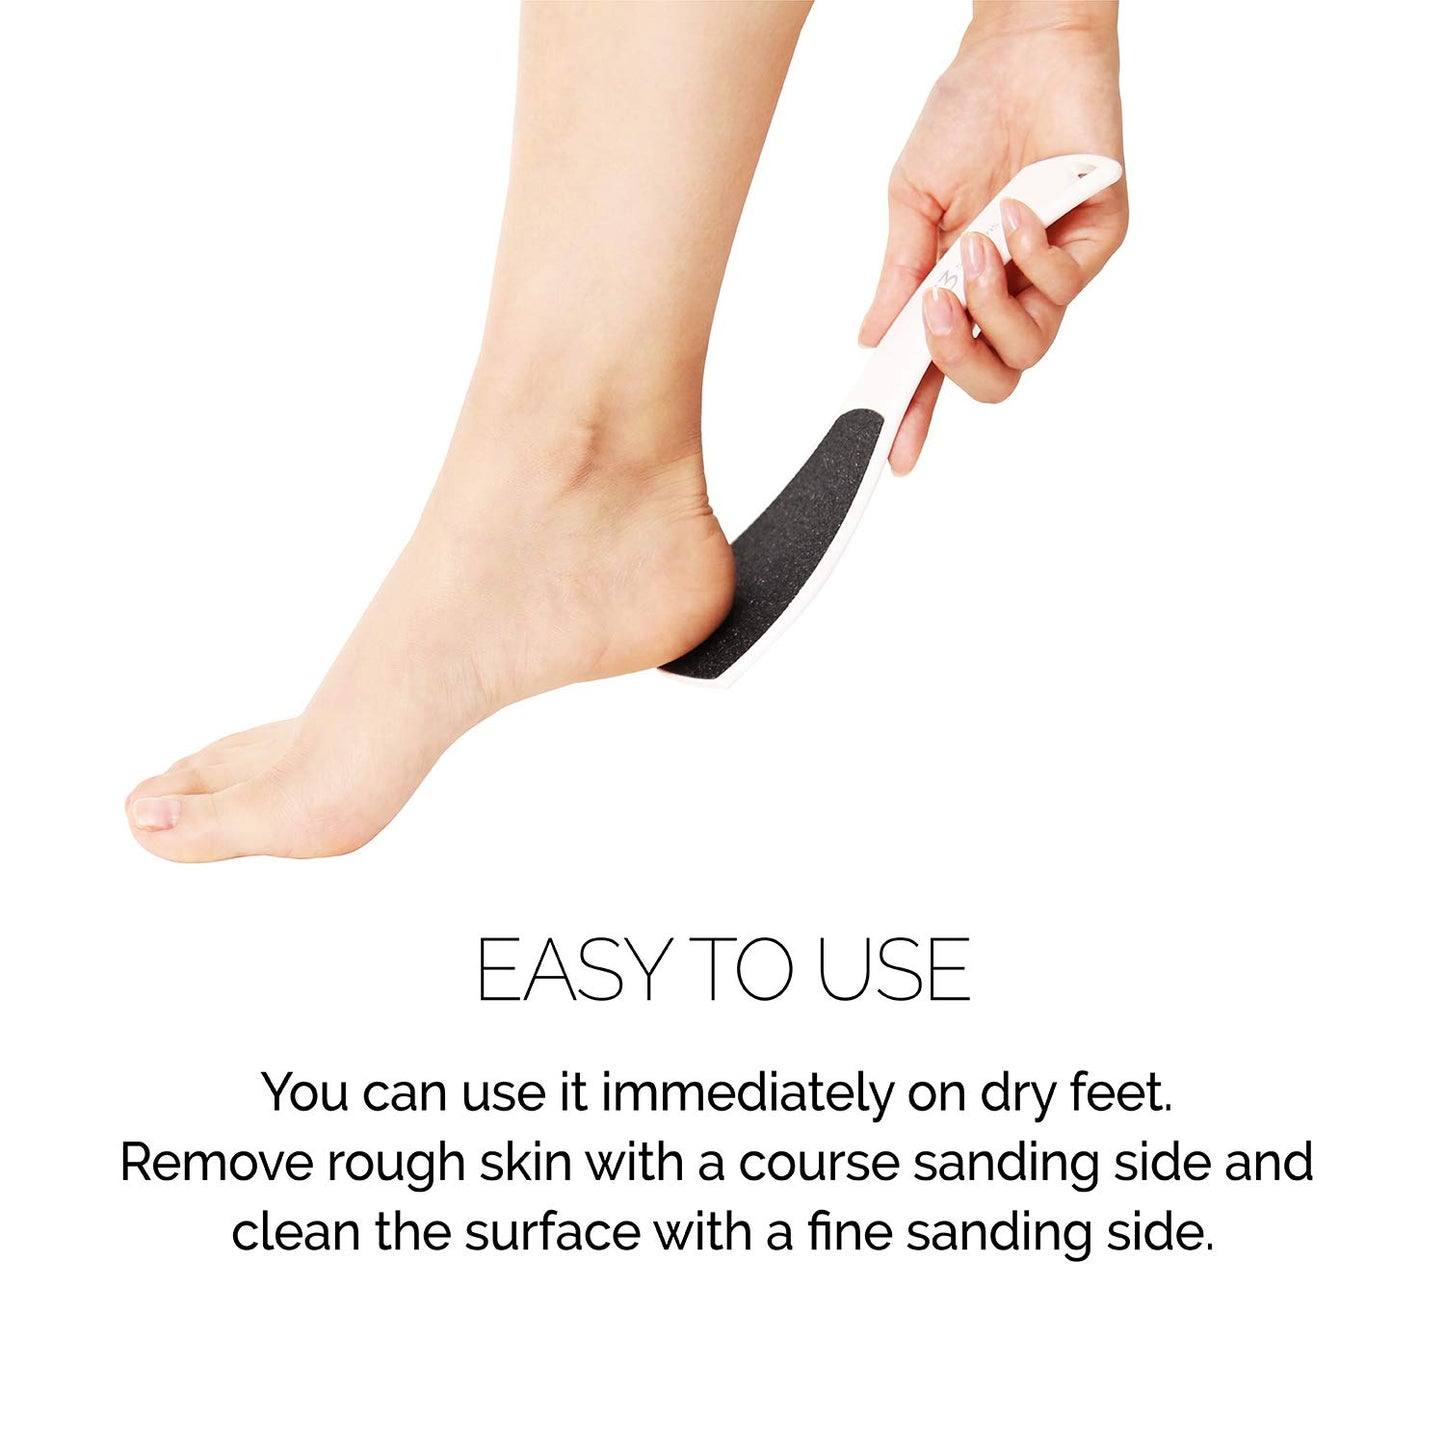 F3 Systems S-Line Emery Foot file, Colossal Double-Sided Pedicure Tool, Effective for Cracked Heel, Ergonomic Design for Easy Grip